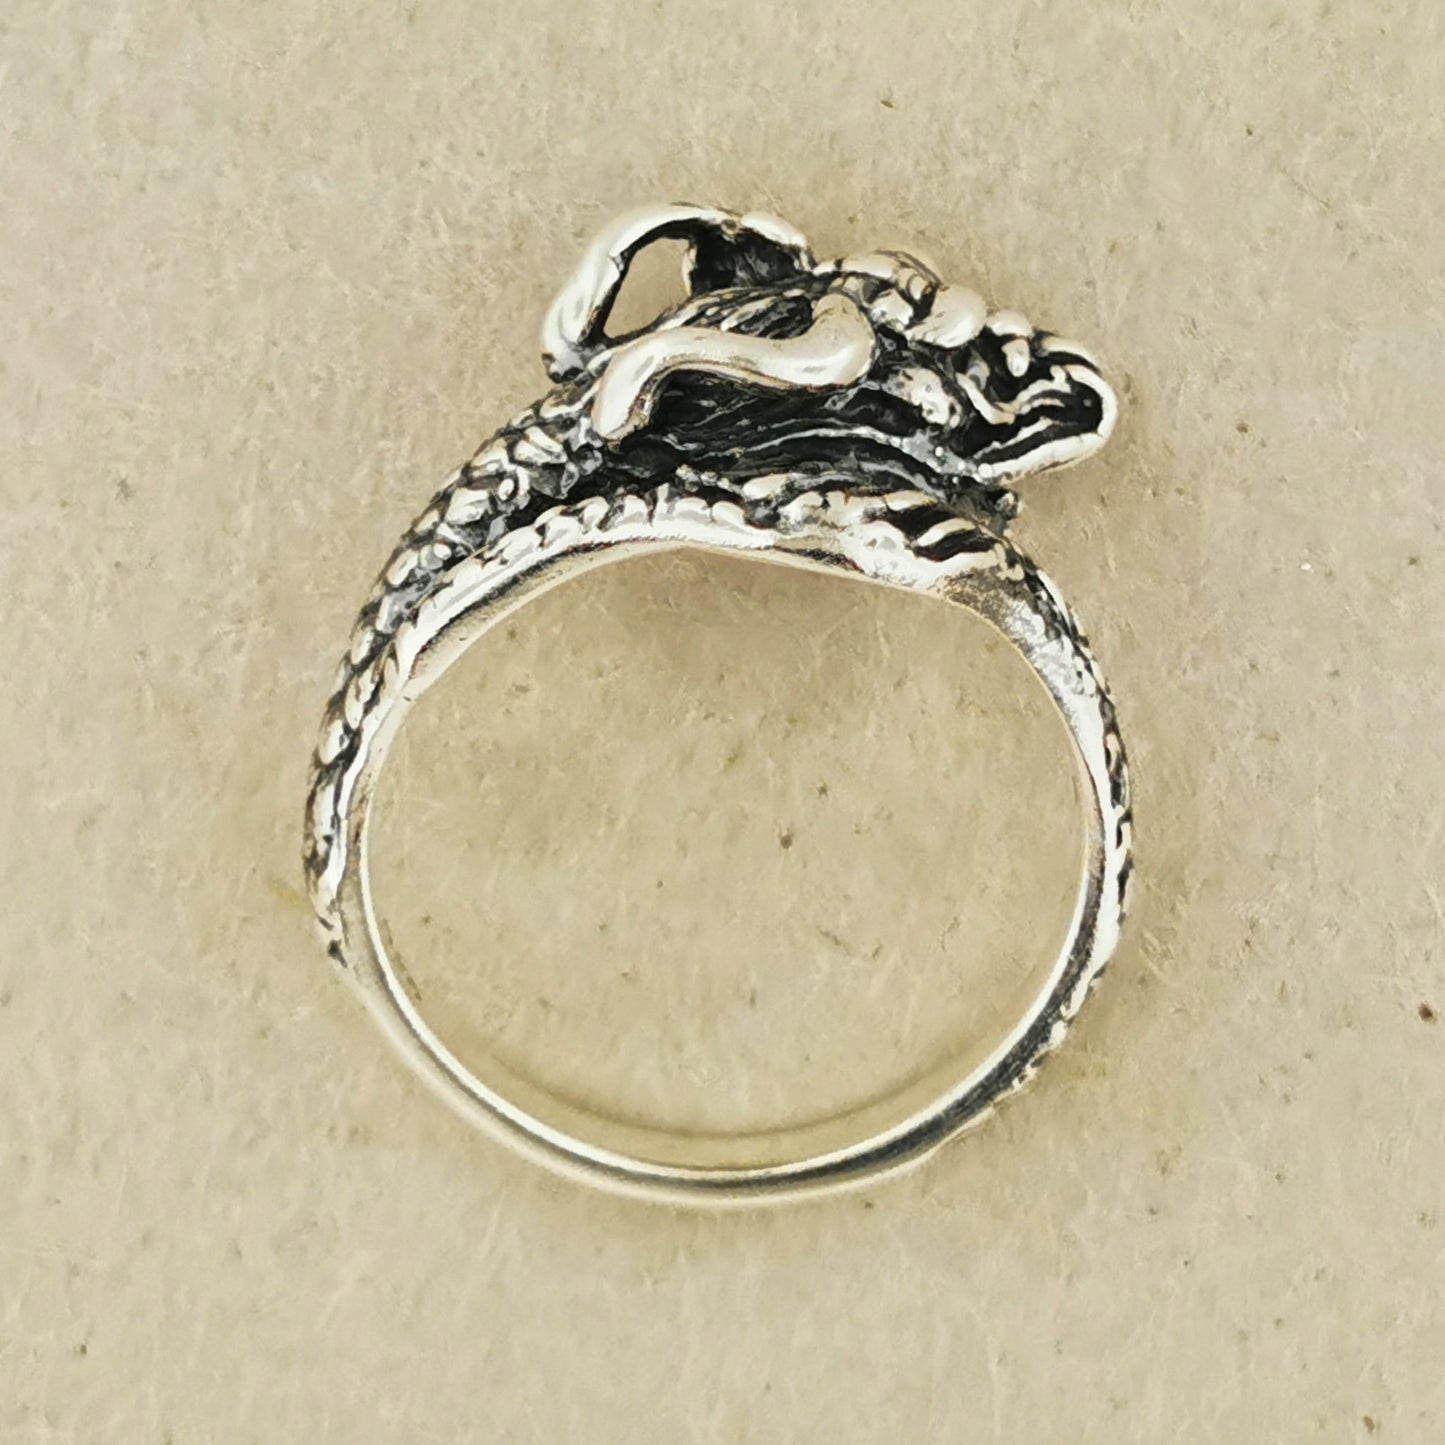 Chinese Dragon Ring in Sterling Silver or Antique Bronze, Sterling Silver Dragon Ring, Silver Dragon Jewelry, Silver Dragon Jewellery, Bronze Dragon Ring, Imperial Dragon Ring, Asian Dragon Ring, Chinese Dragon Ring